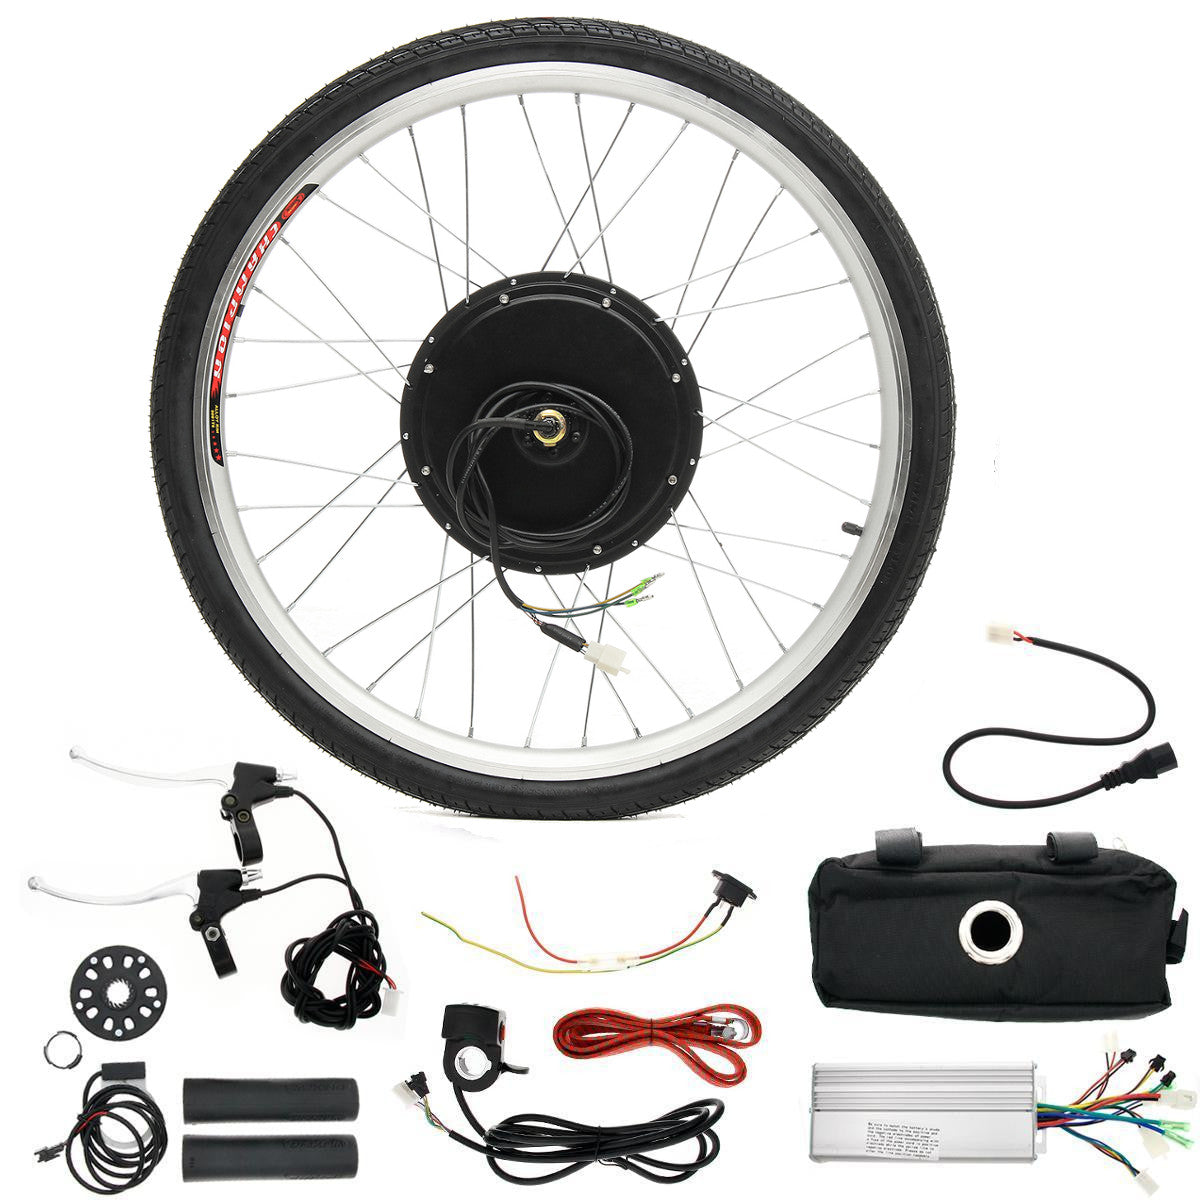 LCD + 48V 1000W 26inch Hight Speed Scooter Electric Bicycle E-bike Hub Motor Conversion Kit - Auto GoShop